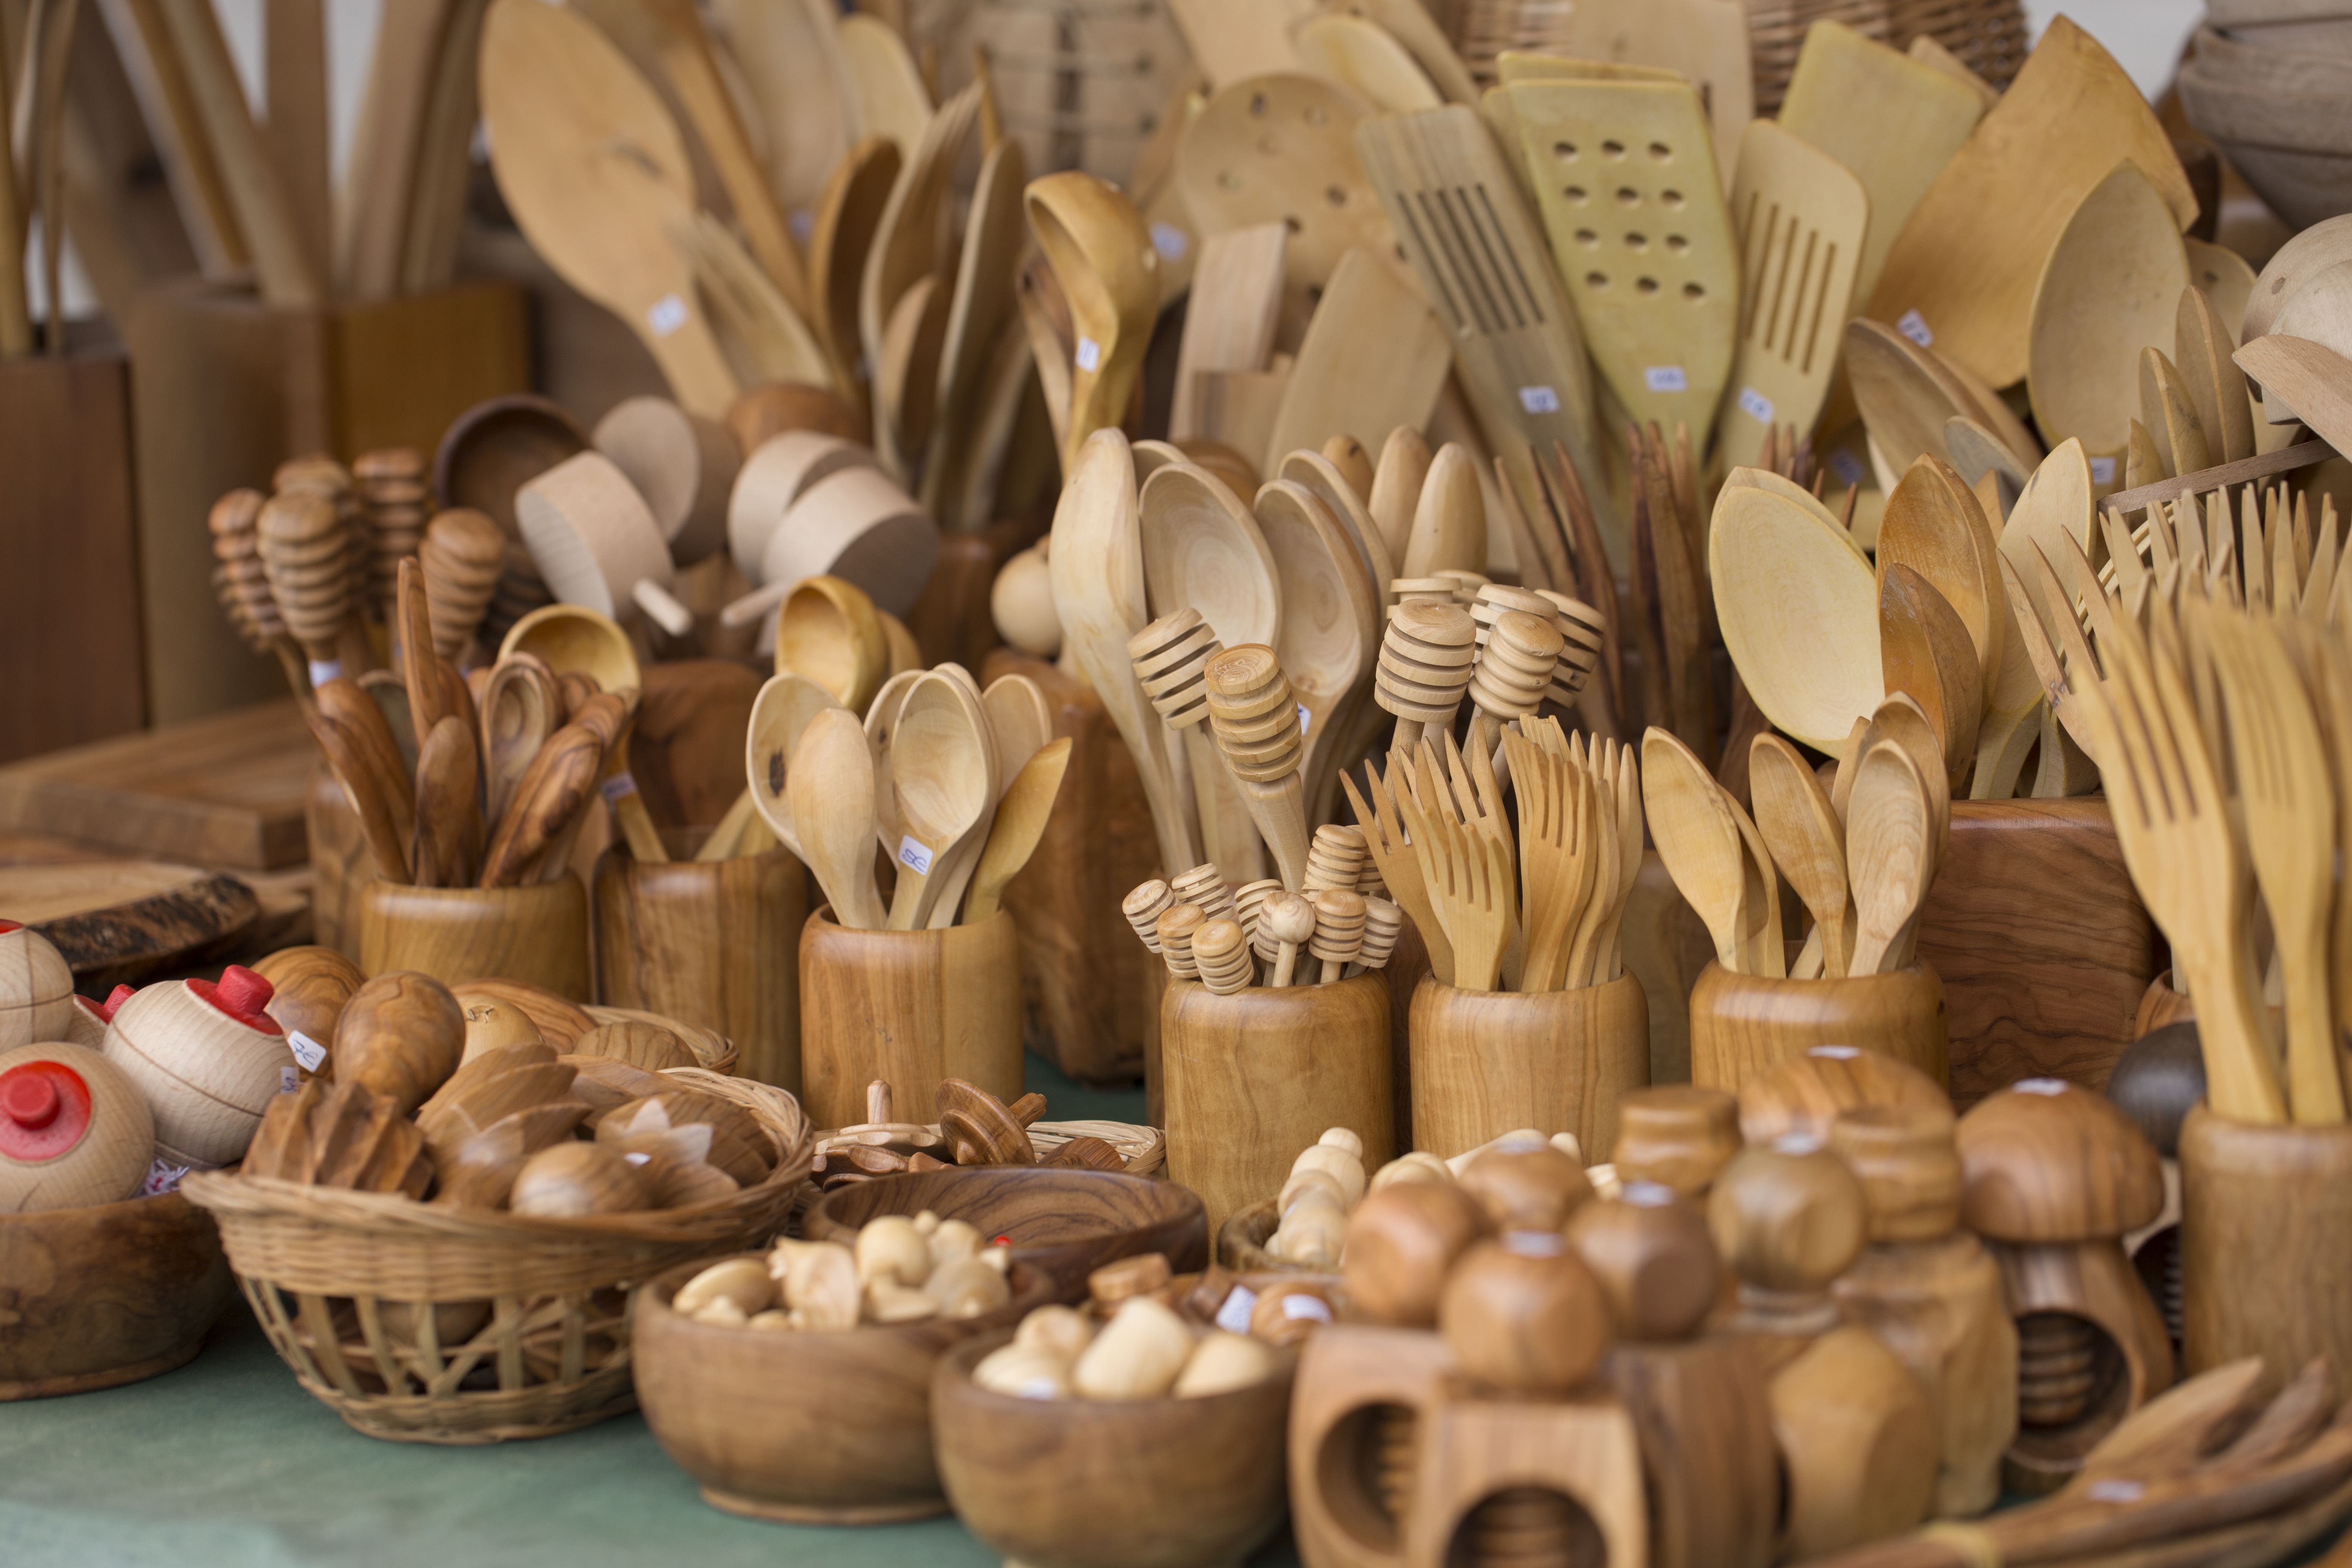 Wooden crafts on display at craft fair